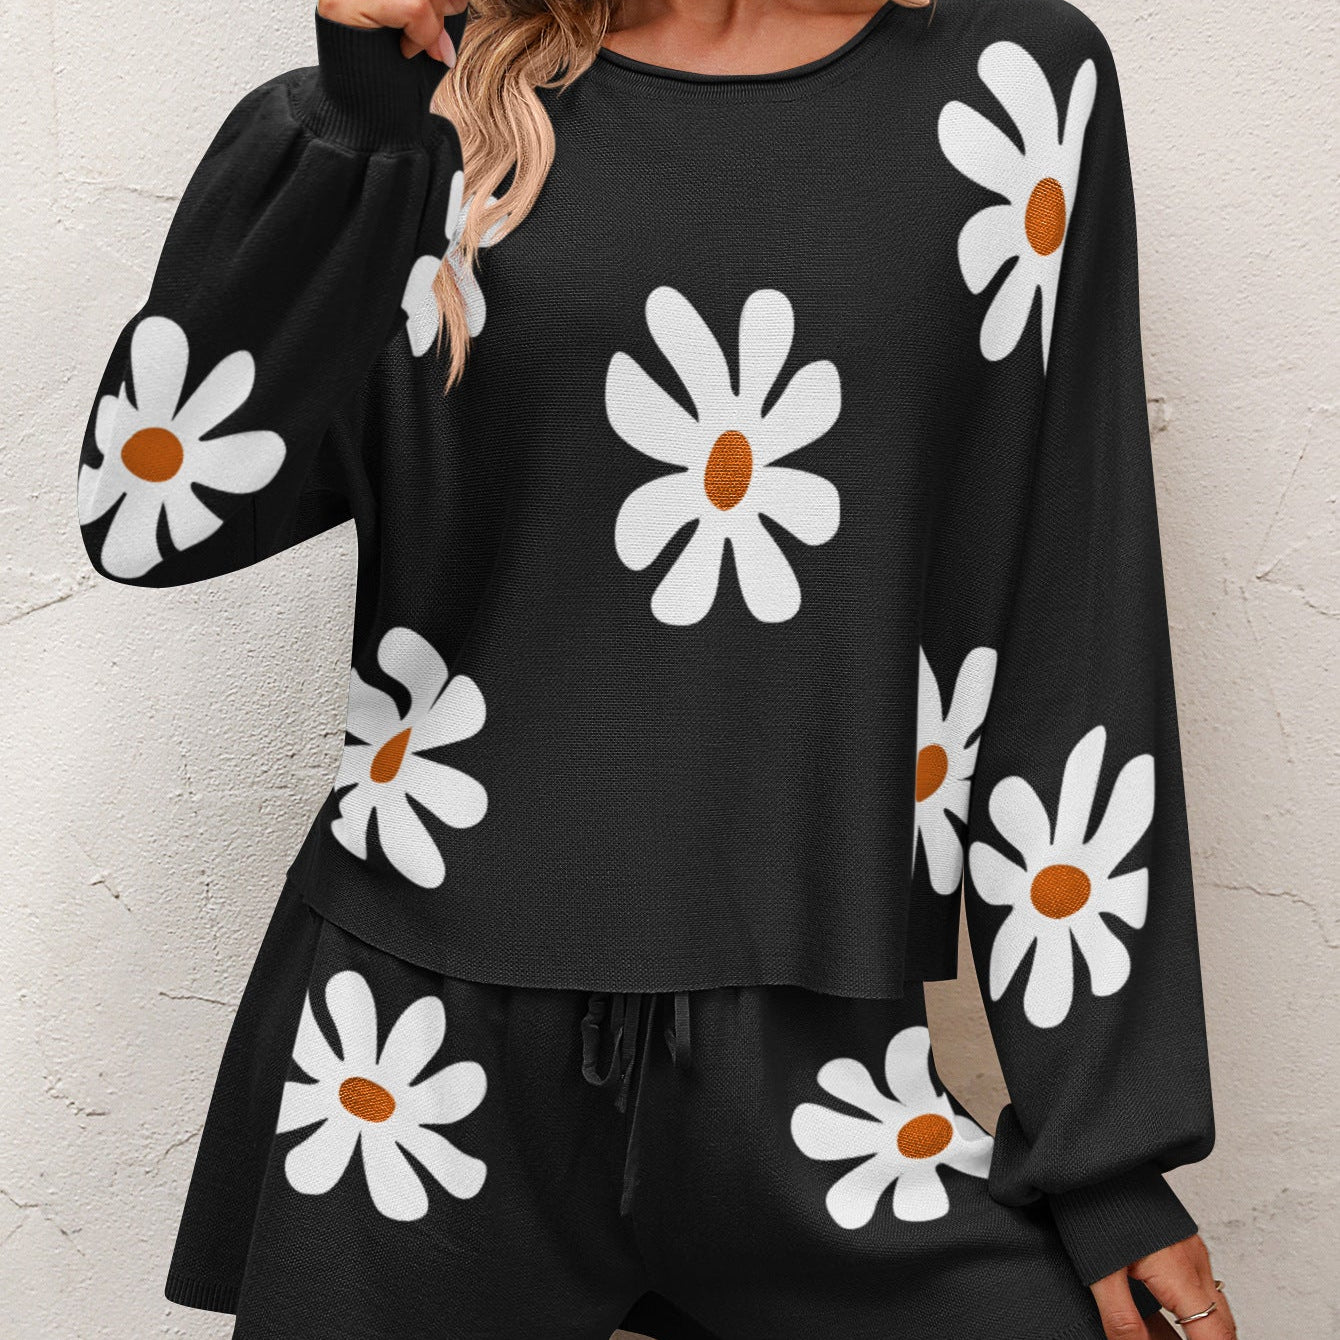 Floral Print Raglan Sleeve Knit Top and Tie Front Sweater Shorts Set - Guy Christopher